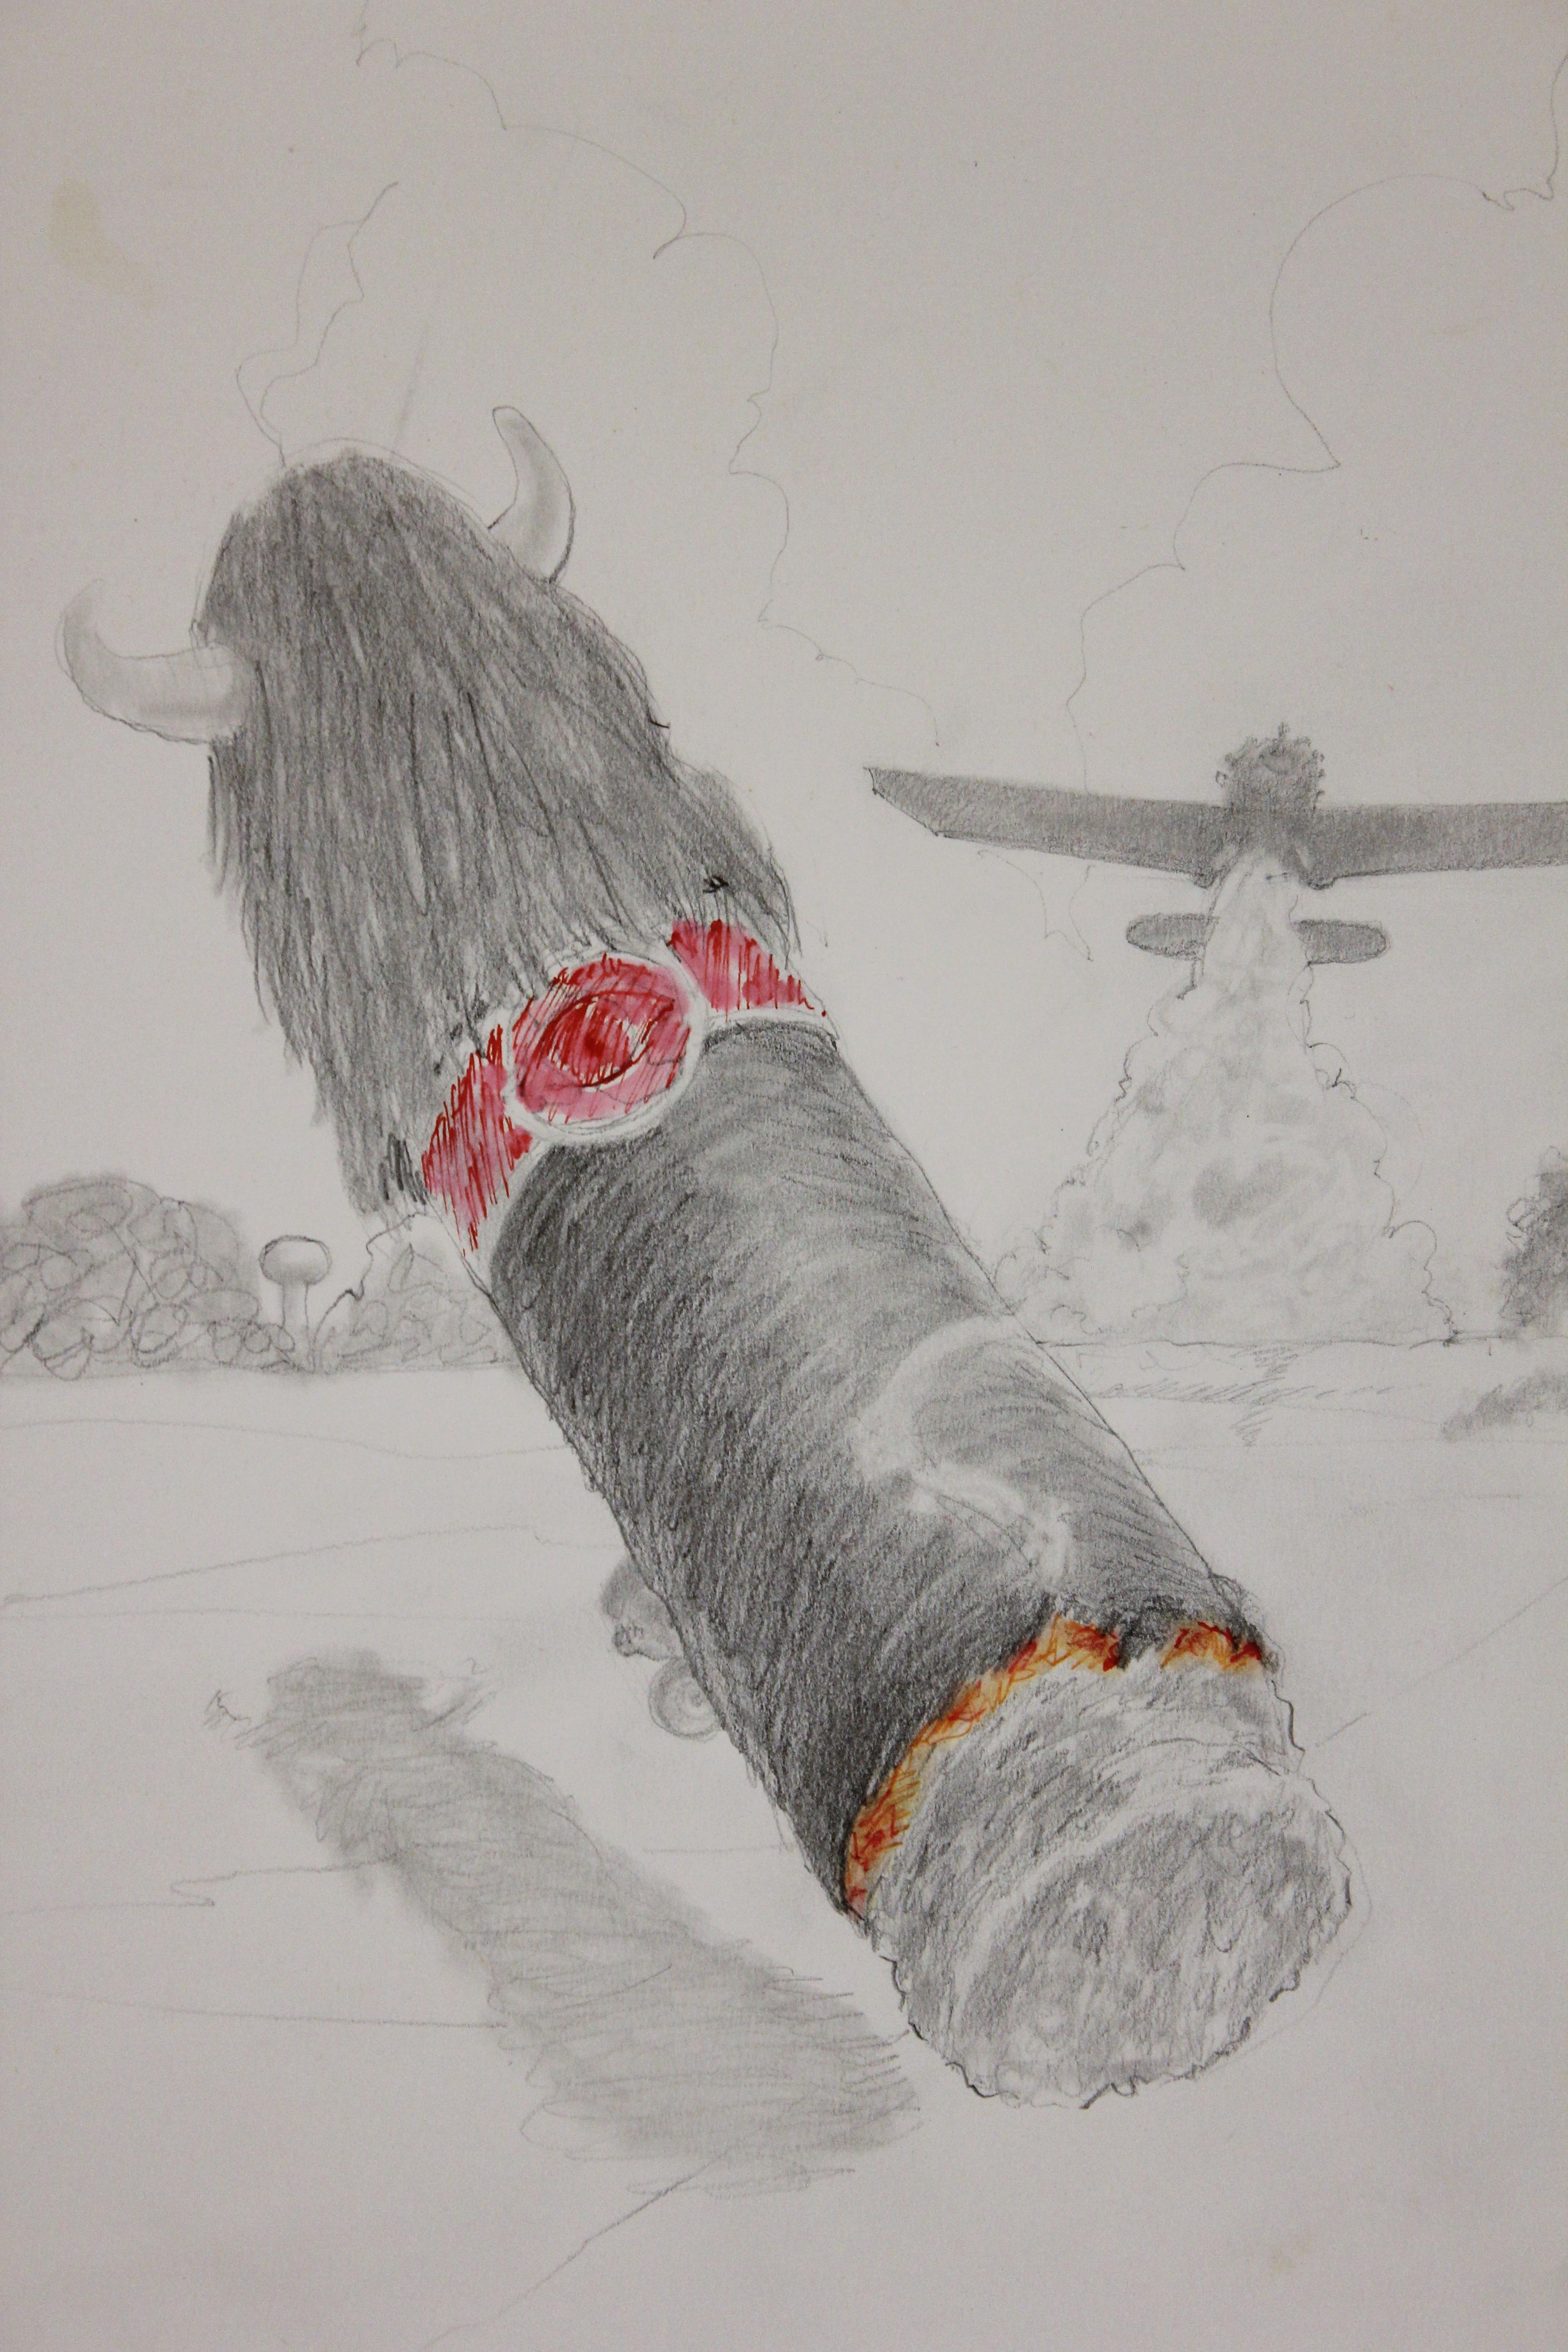 South, Texas Landscape Surrealist Drawing of a Cigar and a Crop Duster - Art by Jack Boynton